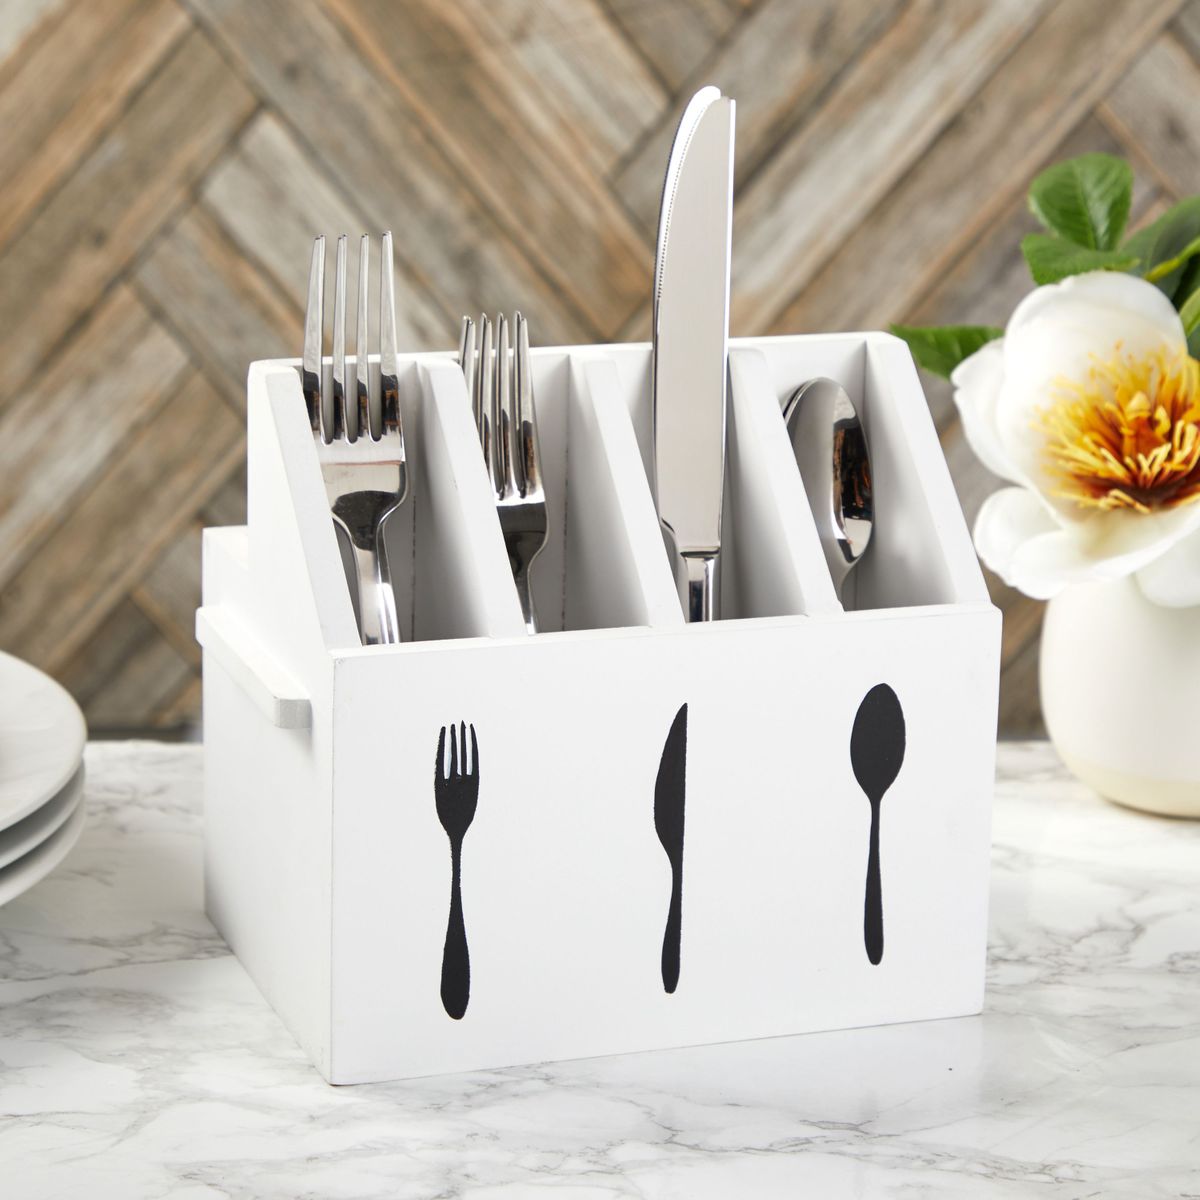 Wooden Utensil Holder for Countertop (7 x 5.5 x 6.6 Inches, White) –  Farmlyn Creek